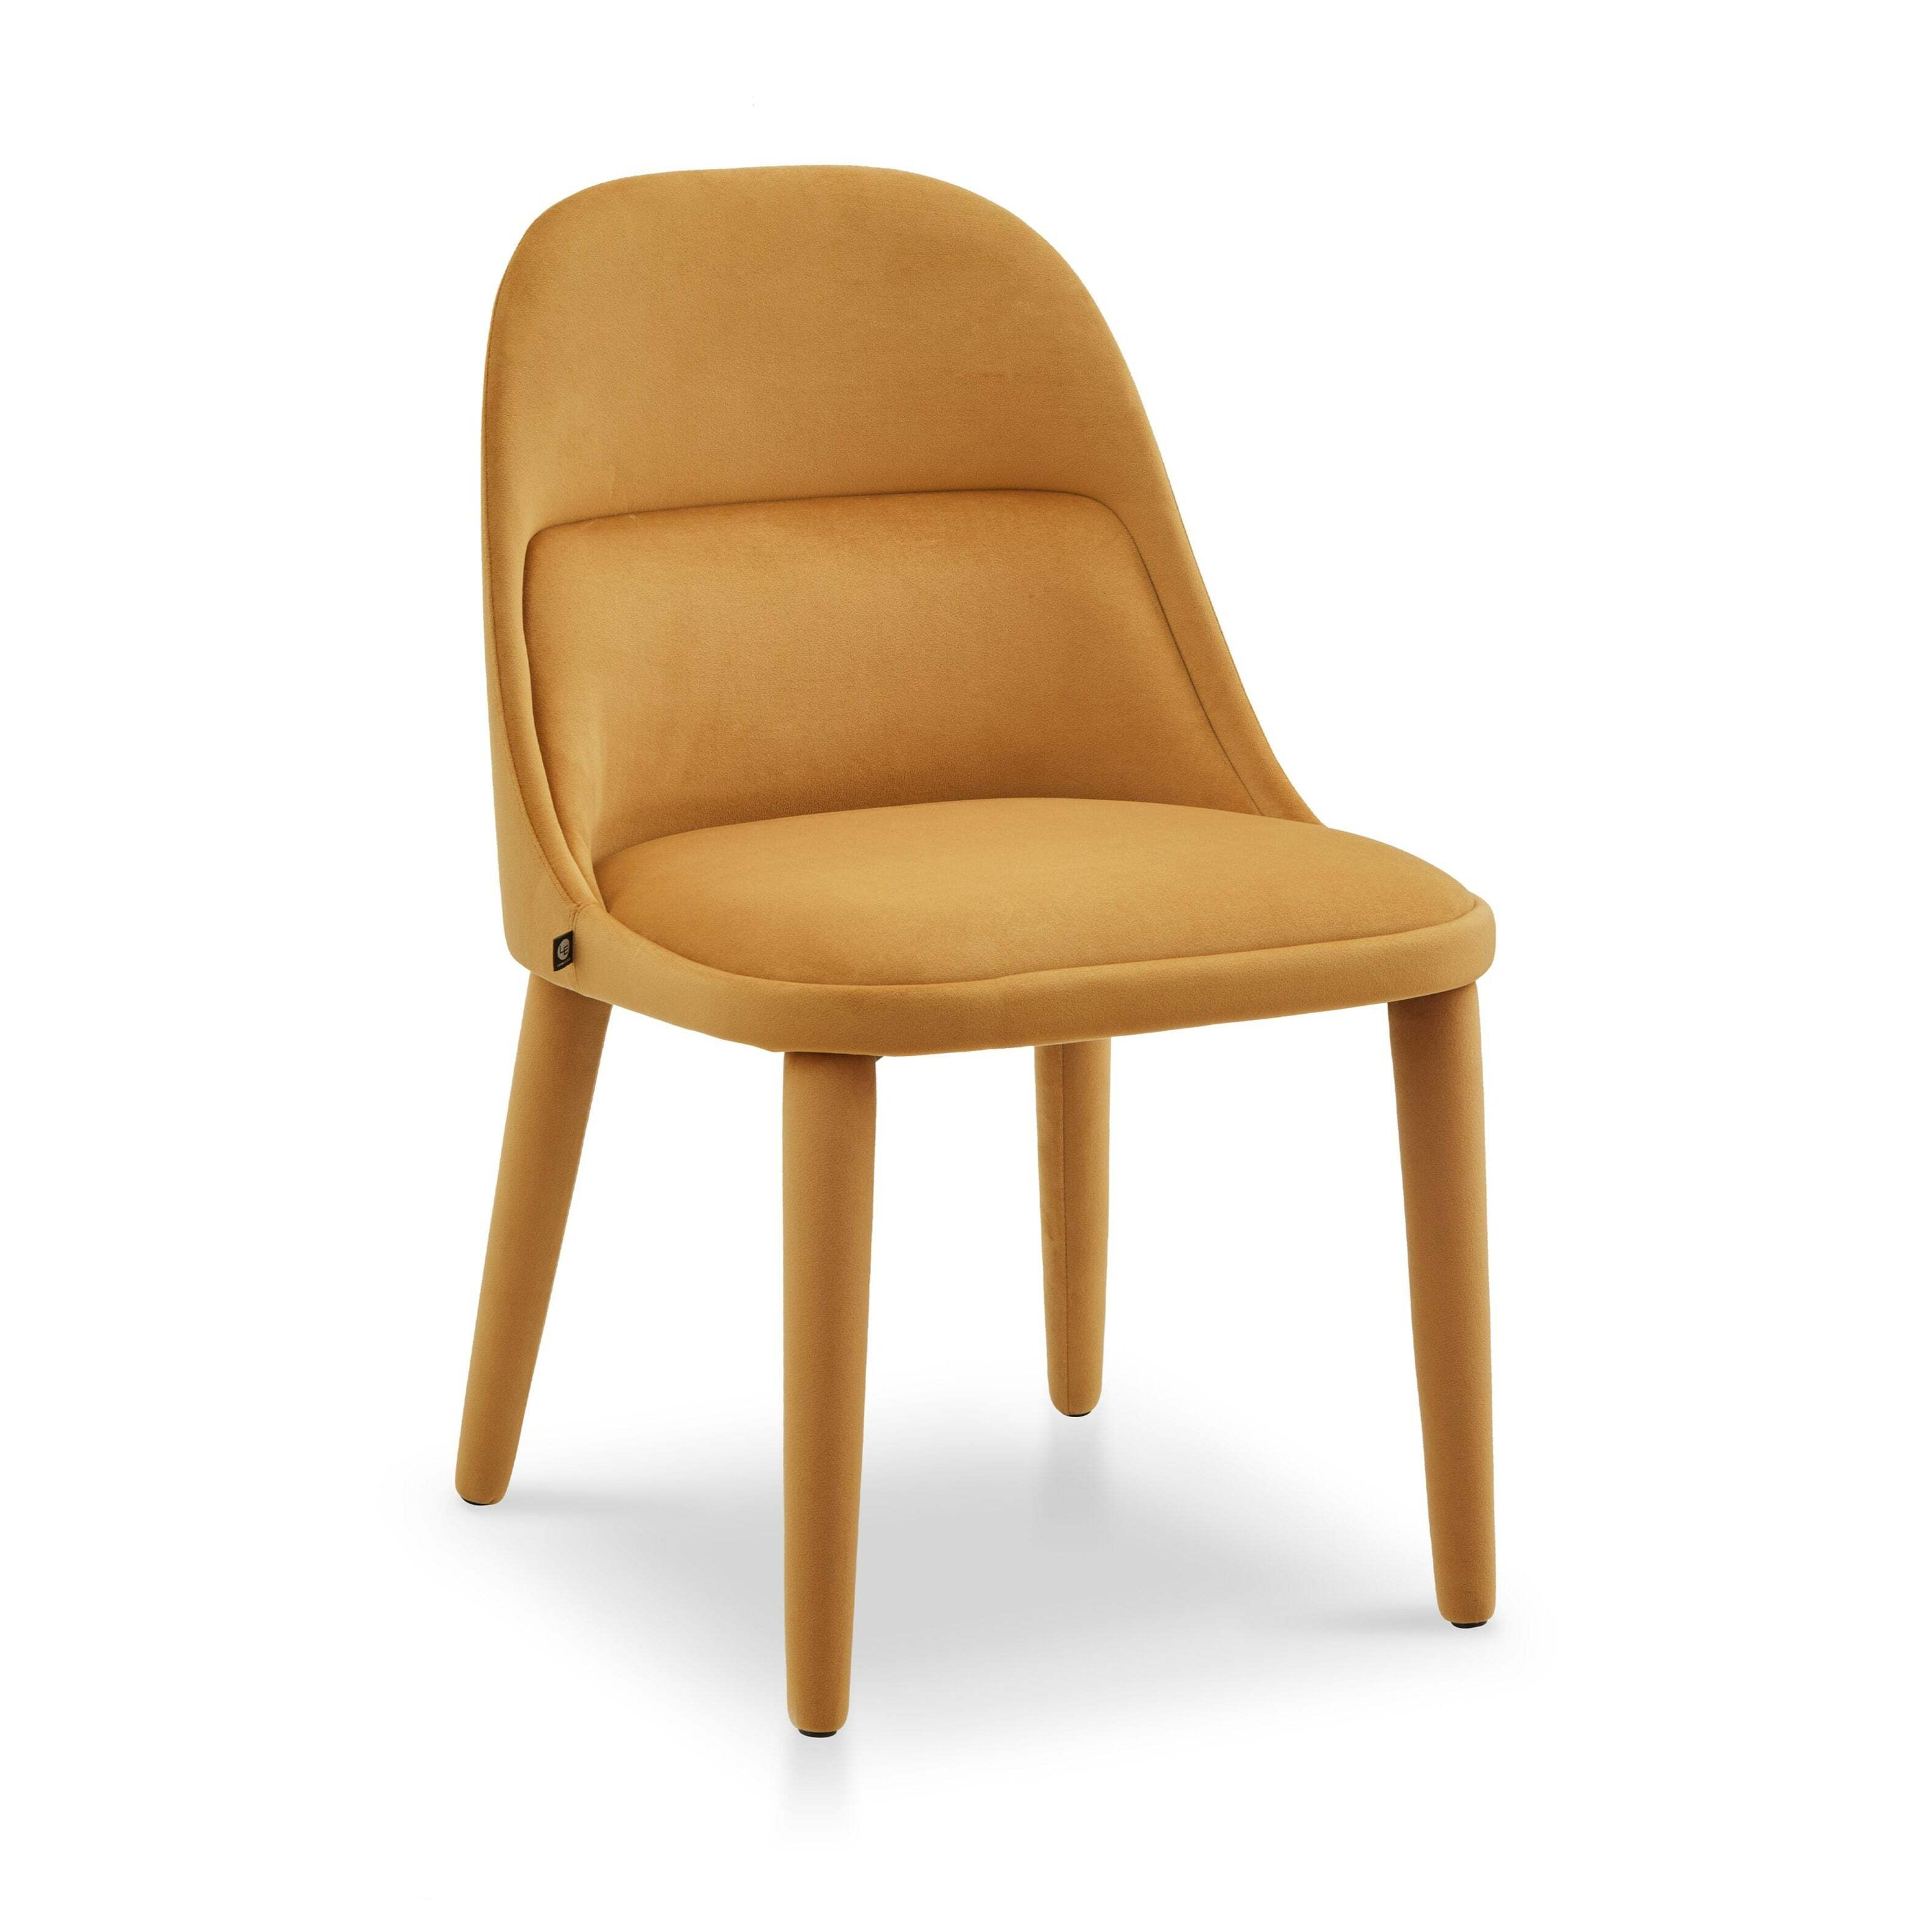 Liang & Eimil Diva Dining Chair in Kaster II Mustard - image 1